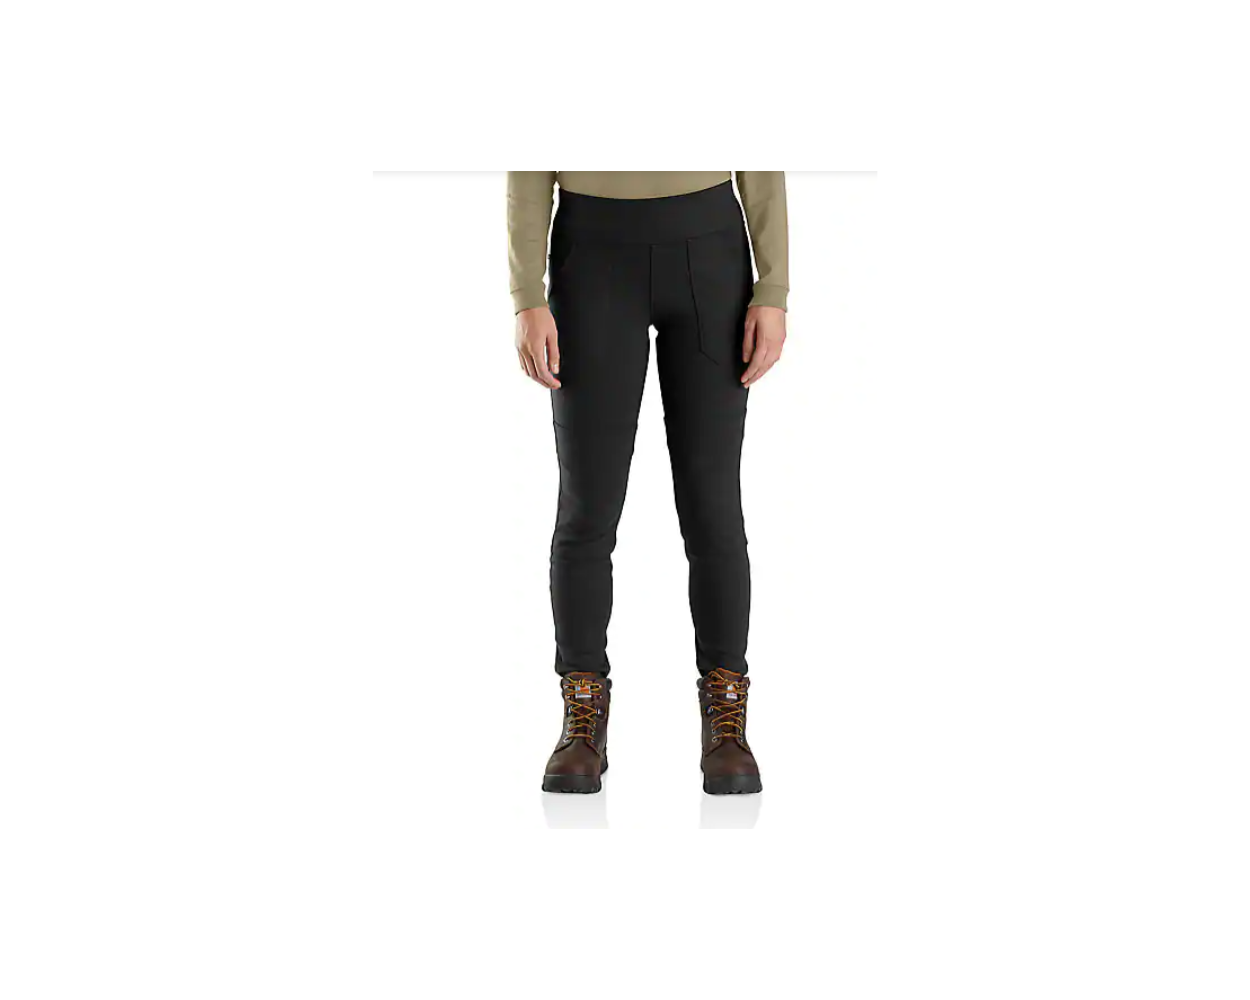 CARHARTT 105283 WOMEN'S FR FITTED MIDWEIGHT UTILITY